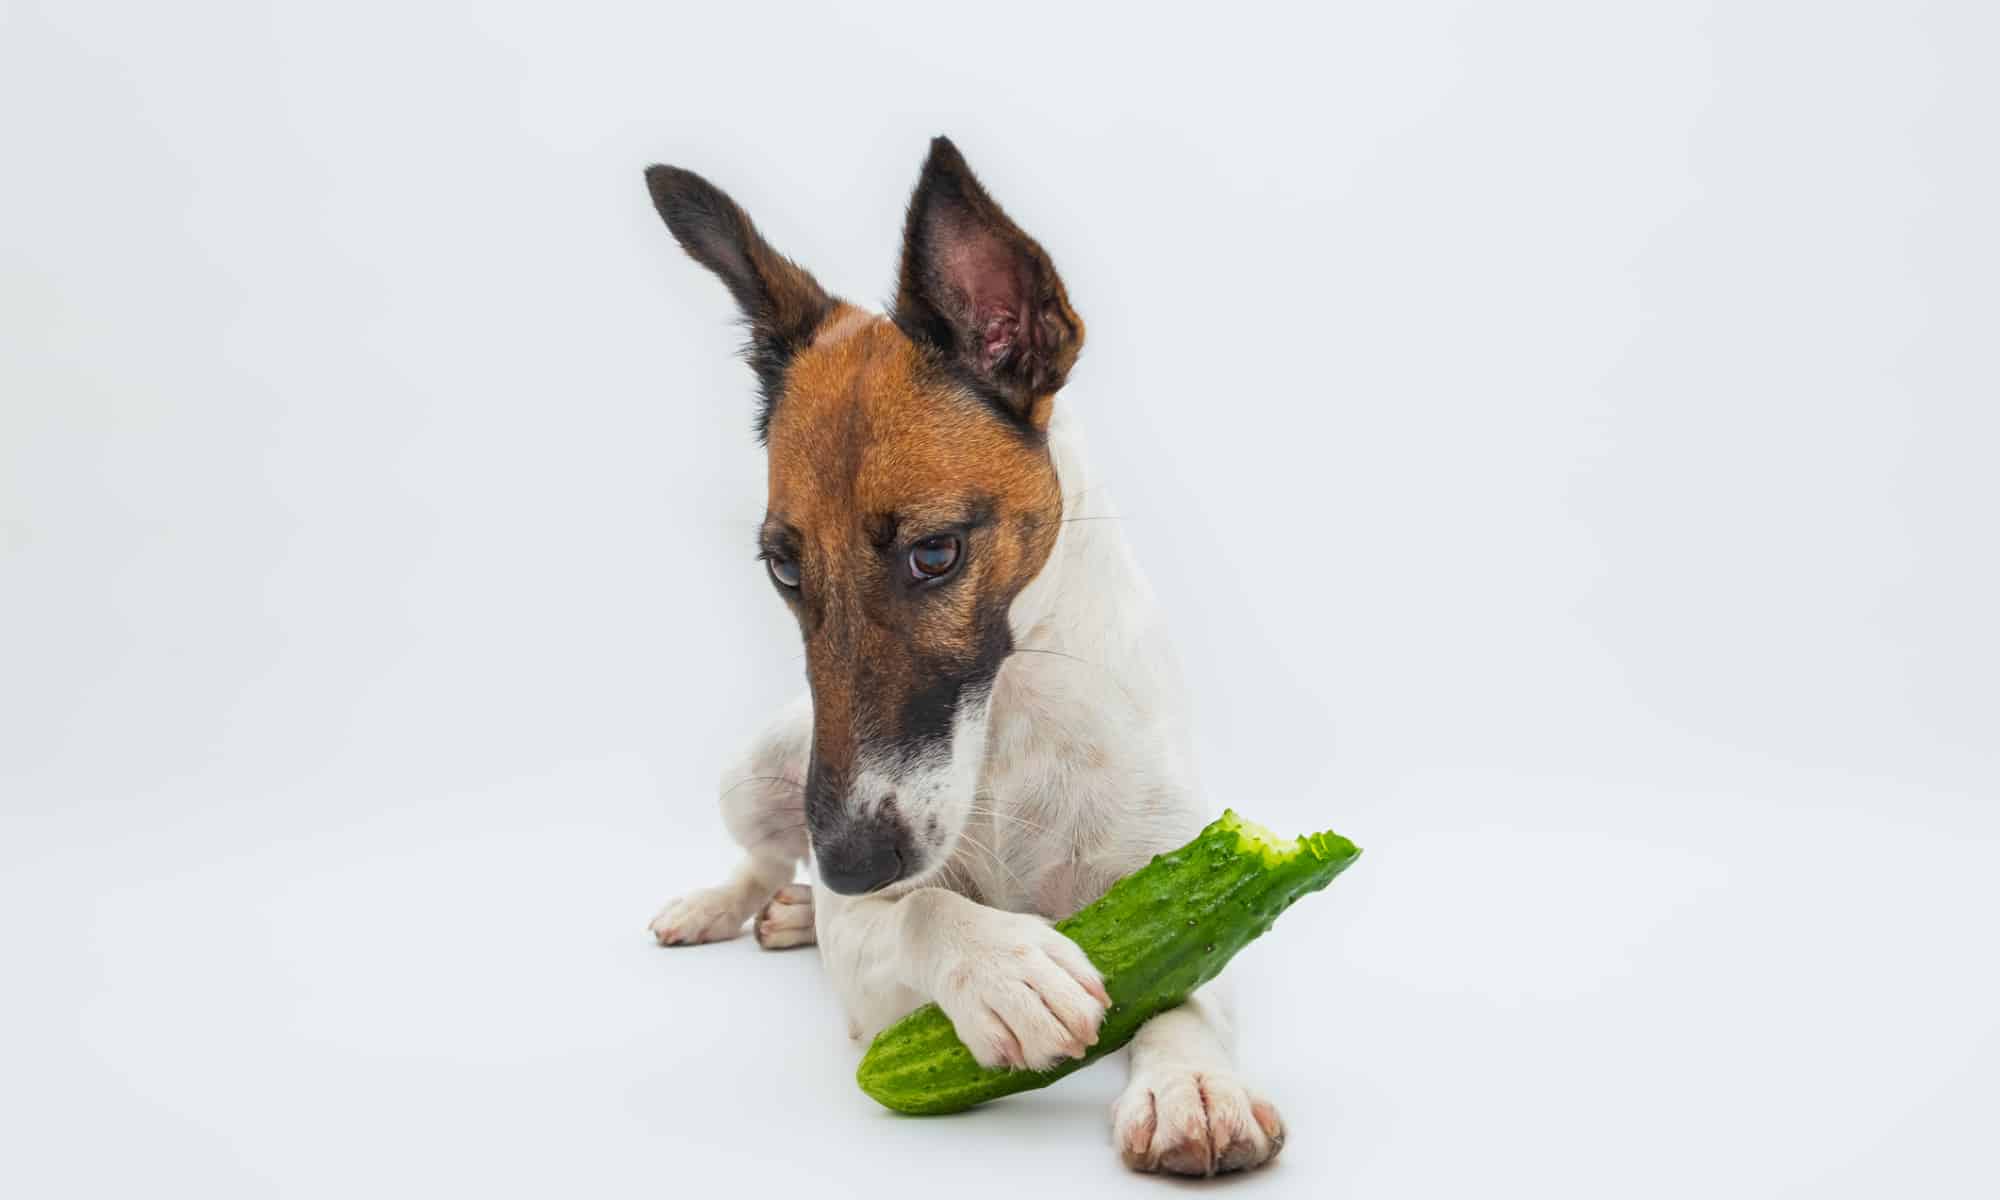 How many cucumbers can dog eat